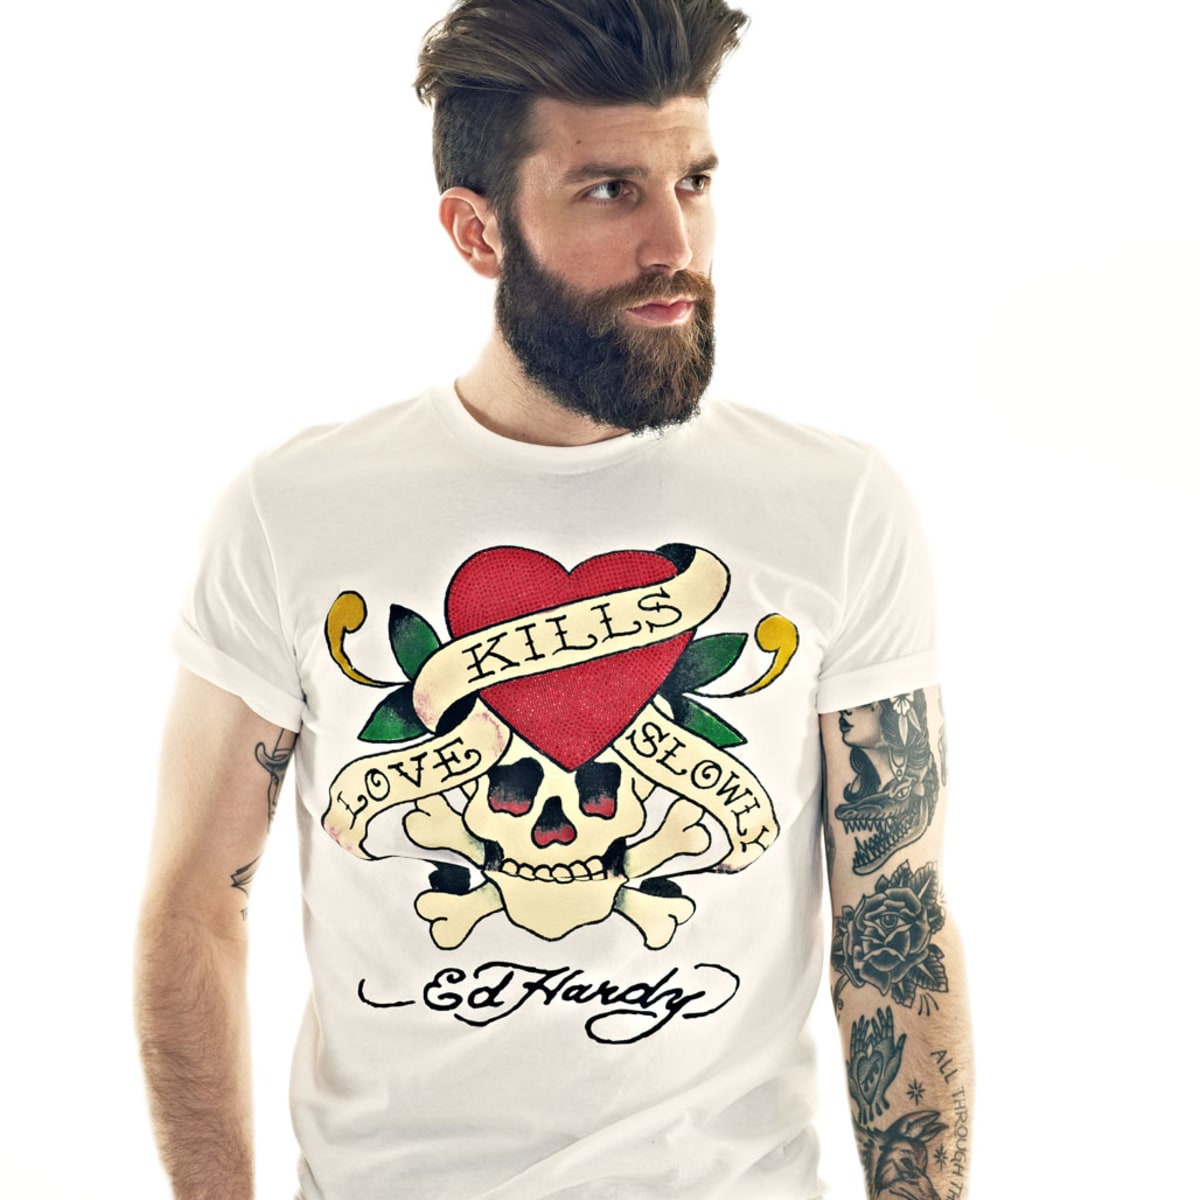 Ed Hardy Shirts for Men: Here are Our Favorites